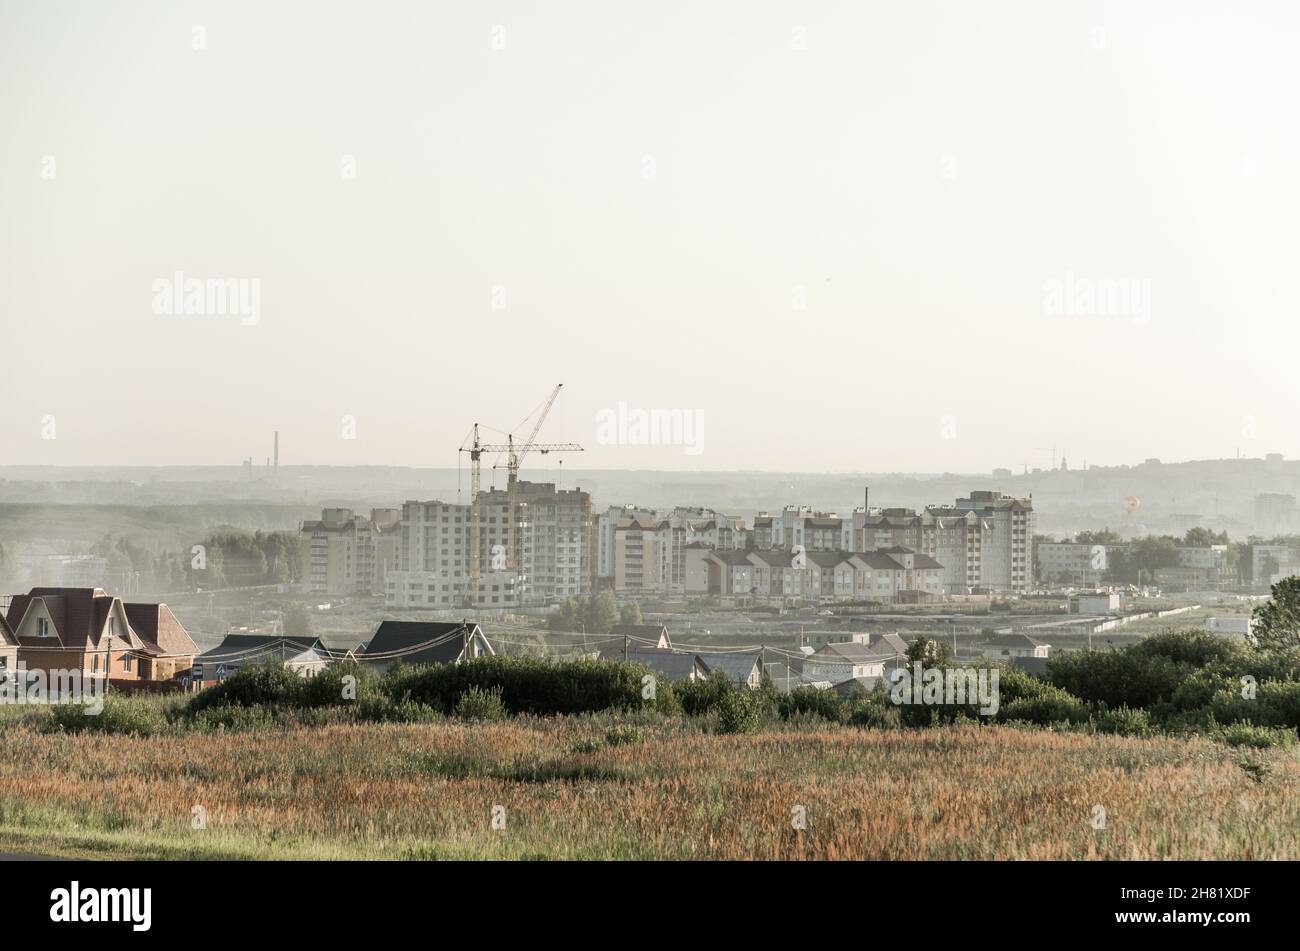 The building under construction on the outskirts of the city in Russia. Stock Photo